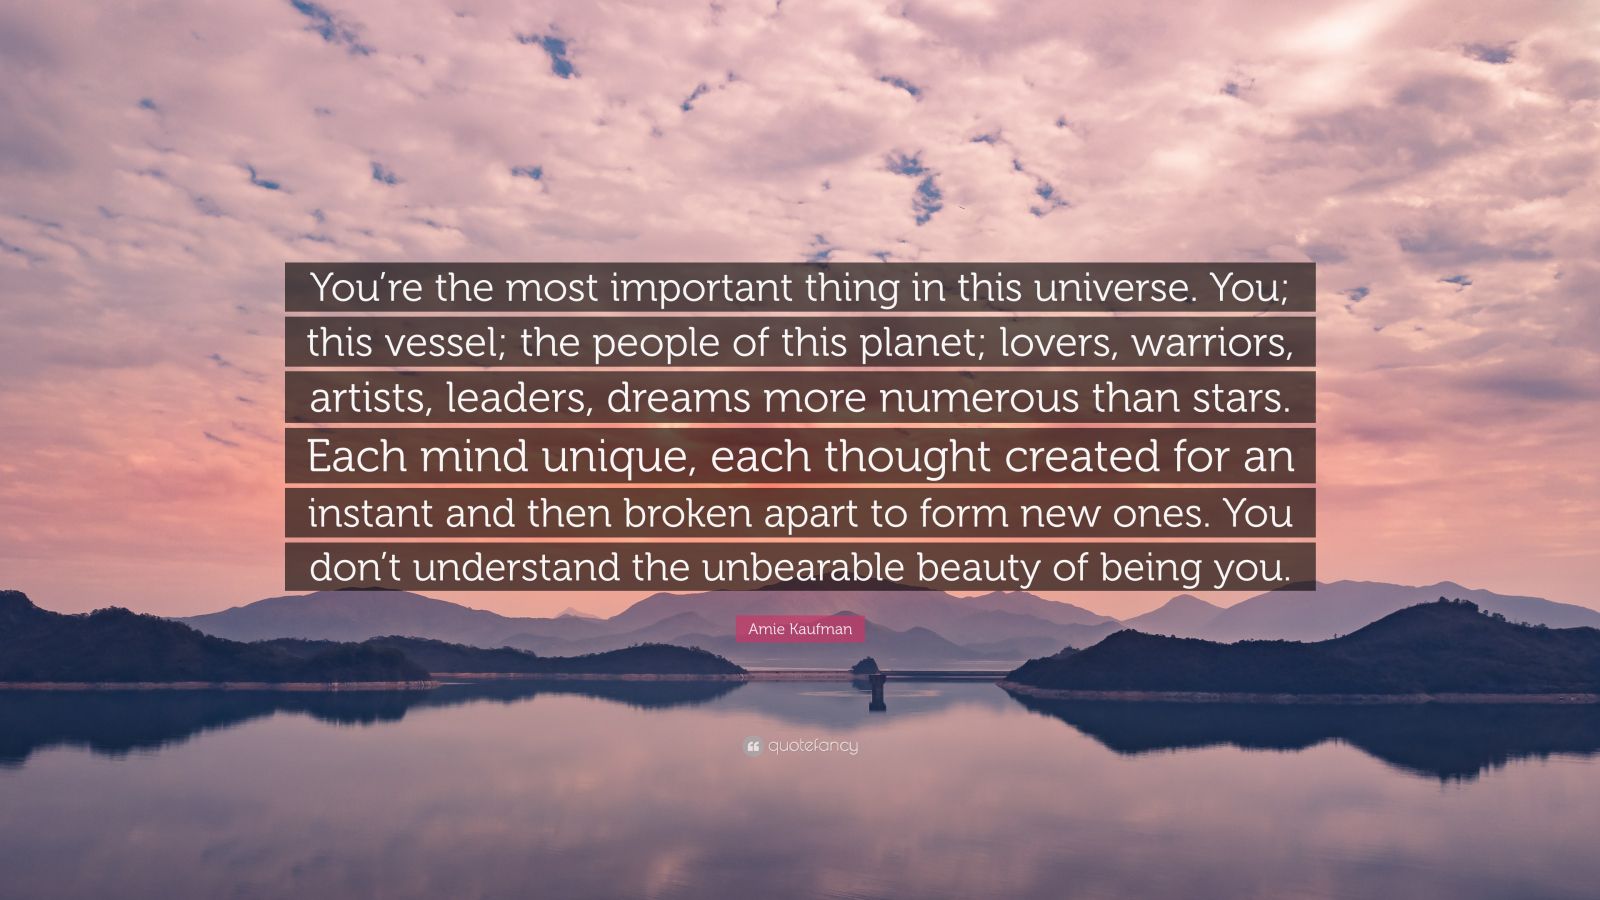 Amie Kaufman Quote: “You’re the most important thing in this universe ...